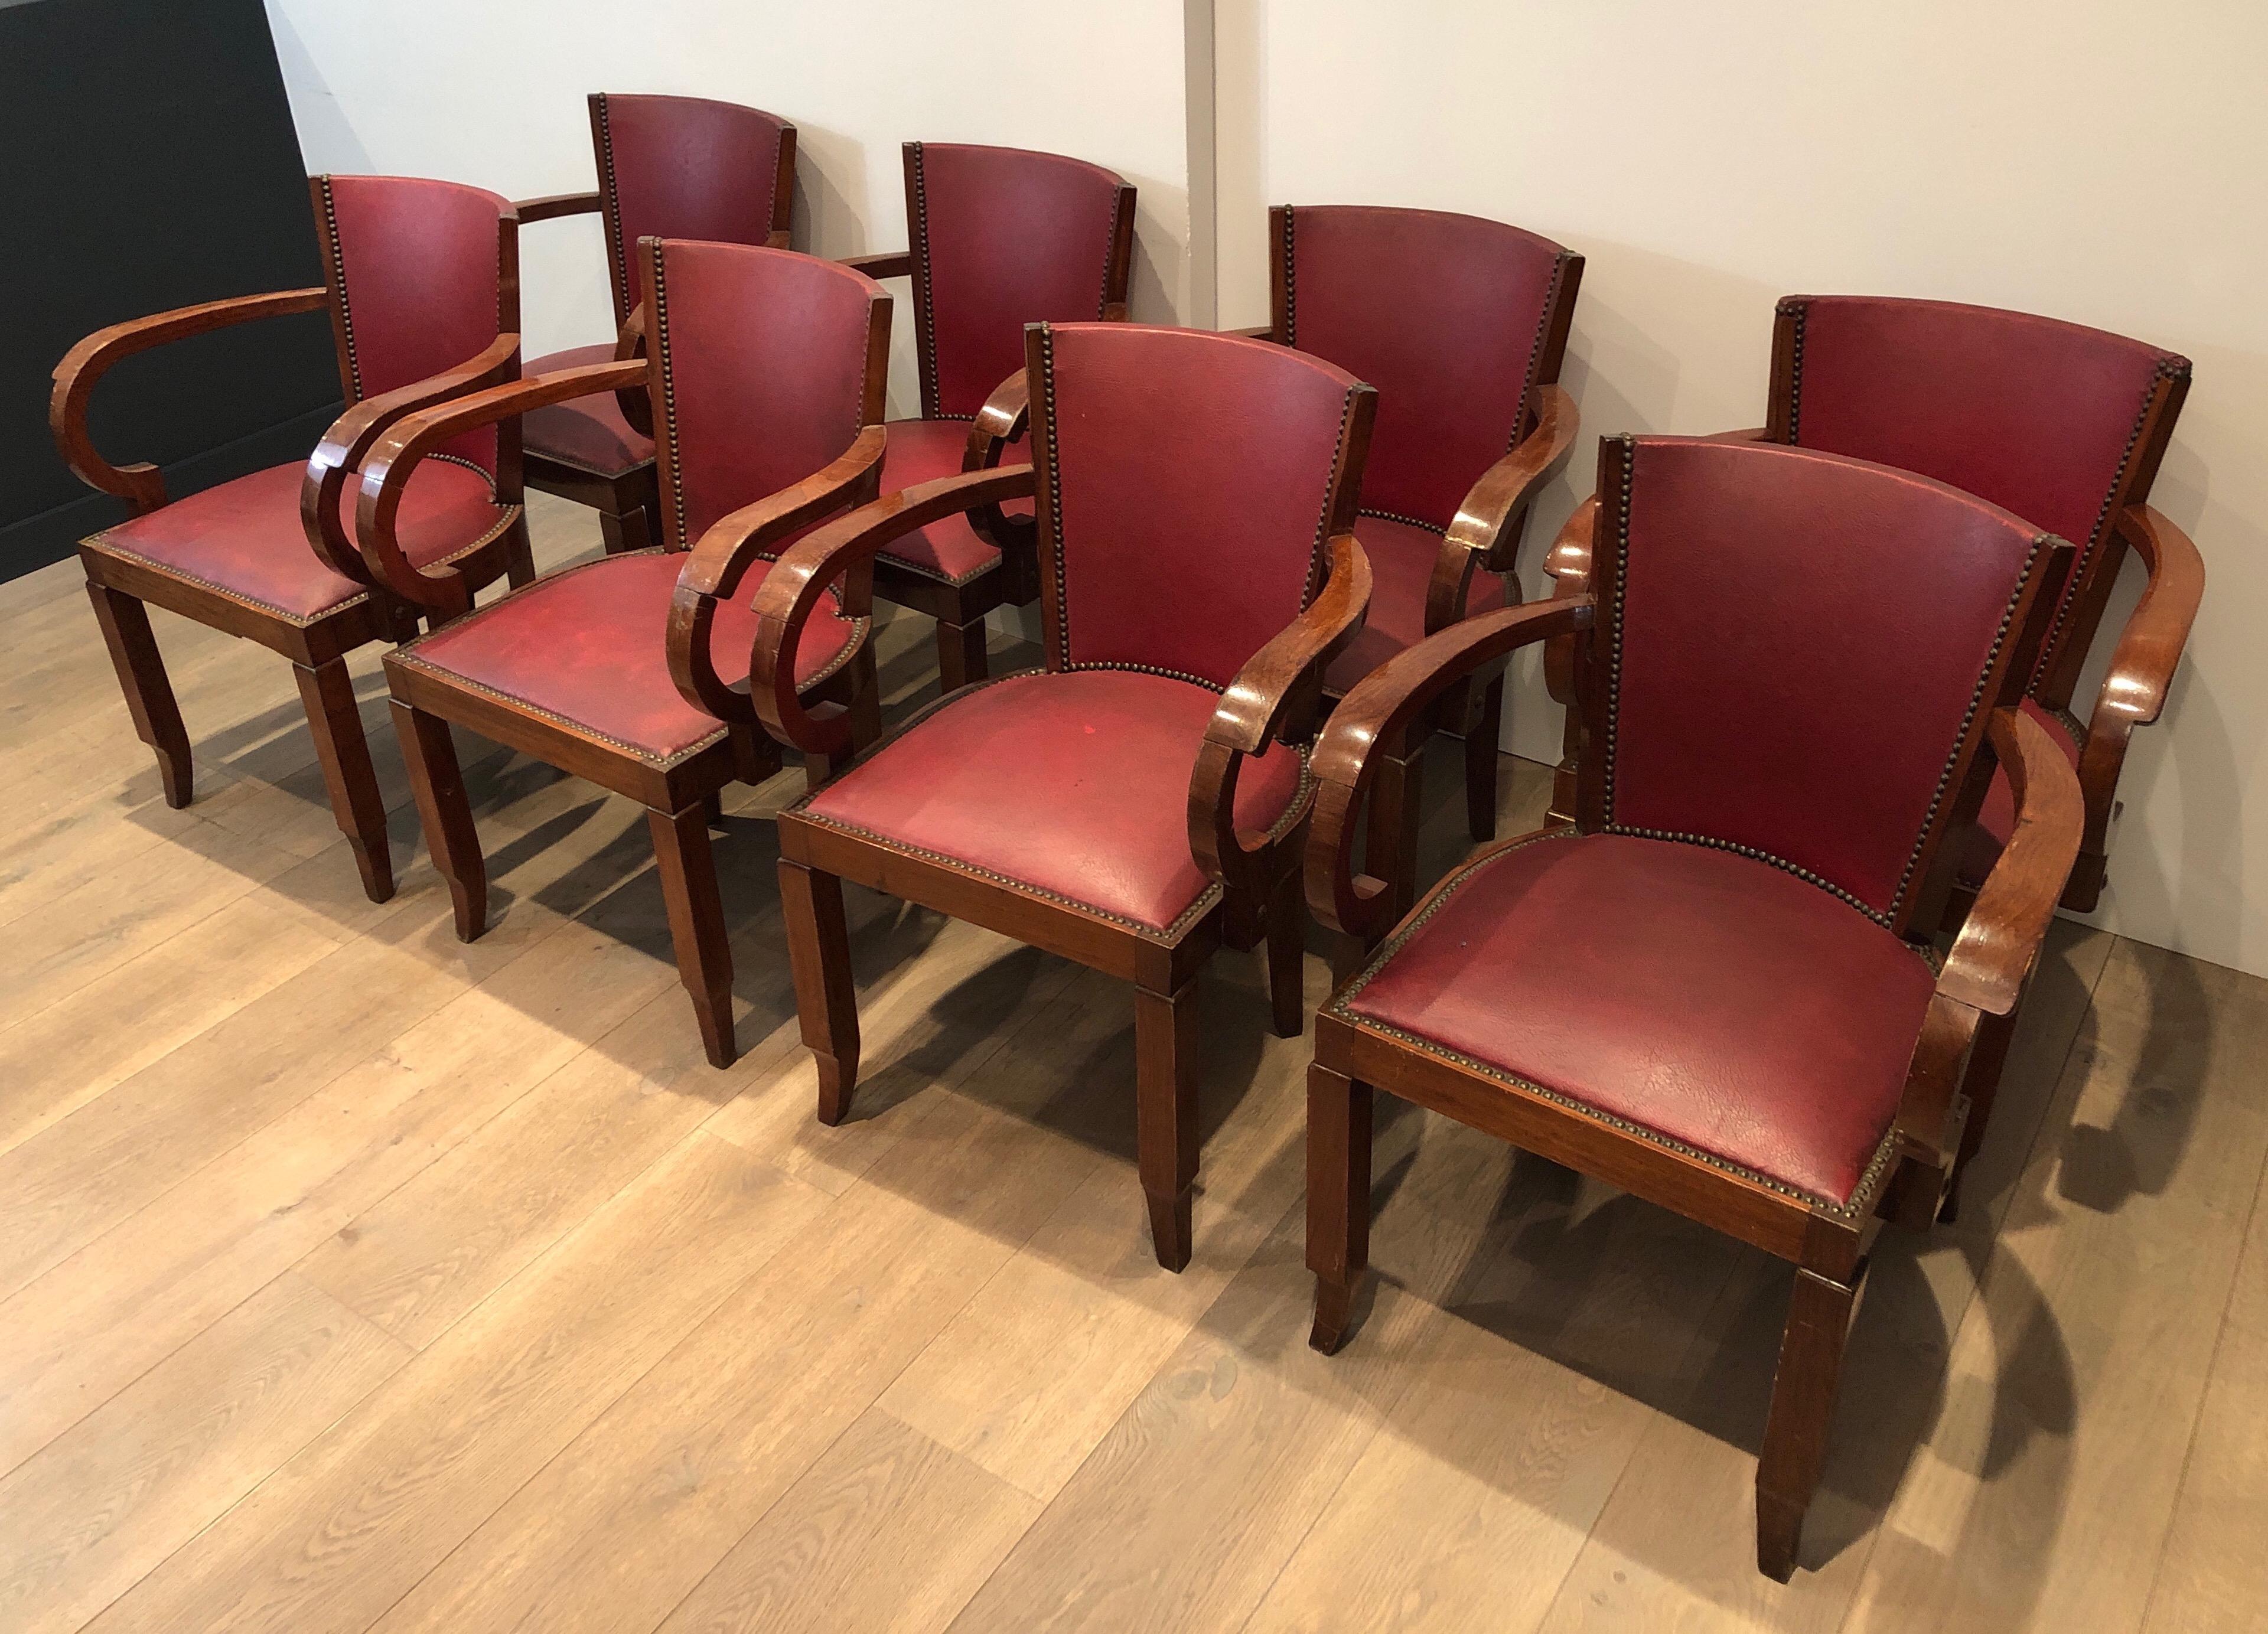 Rare set of Mahogany and Faux-Leather Art Deco armchairs. French. Circa 1930.